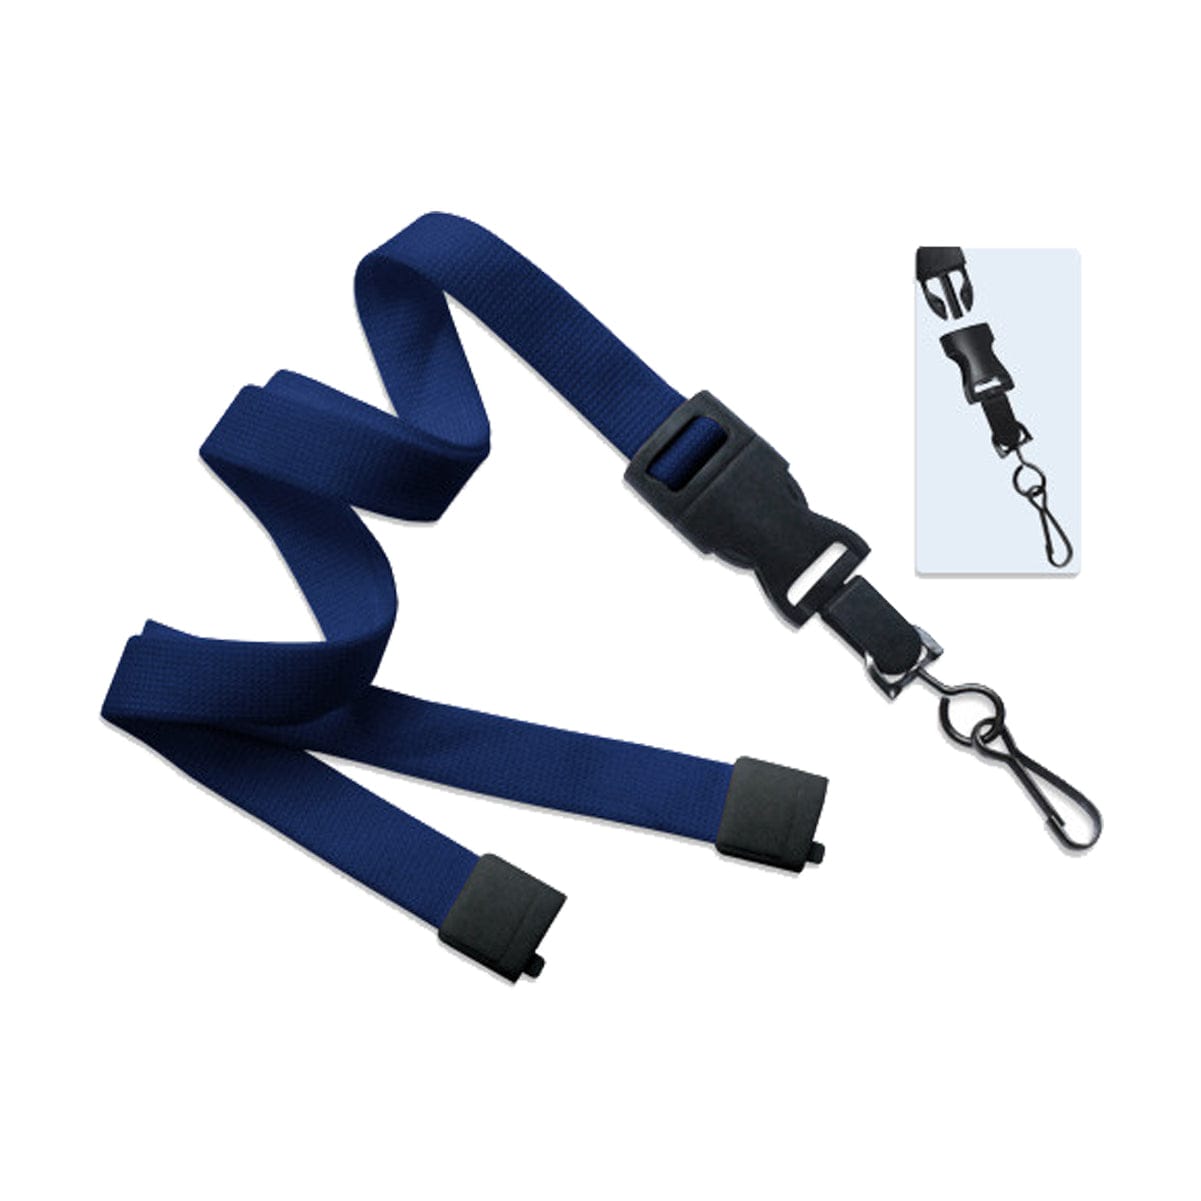 Lanyard with Buckle and Hook Small 212 - School & Office Supplies